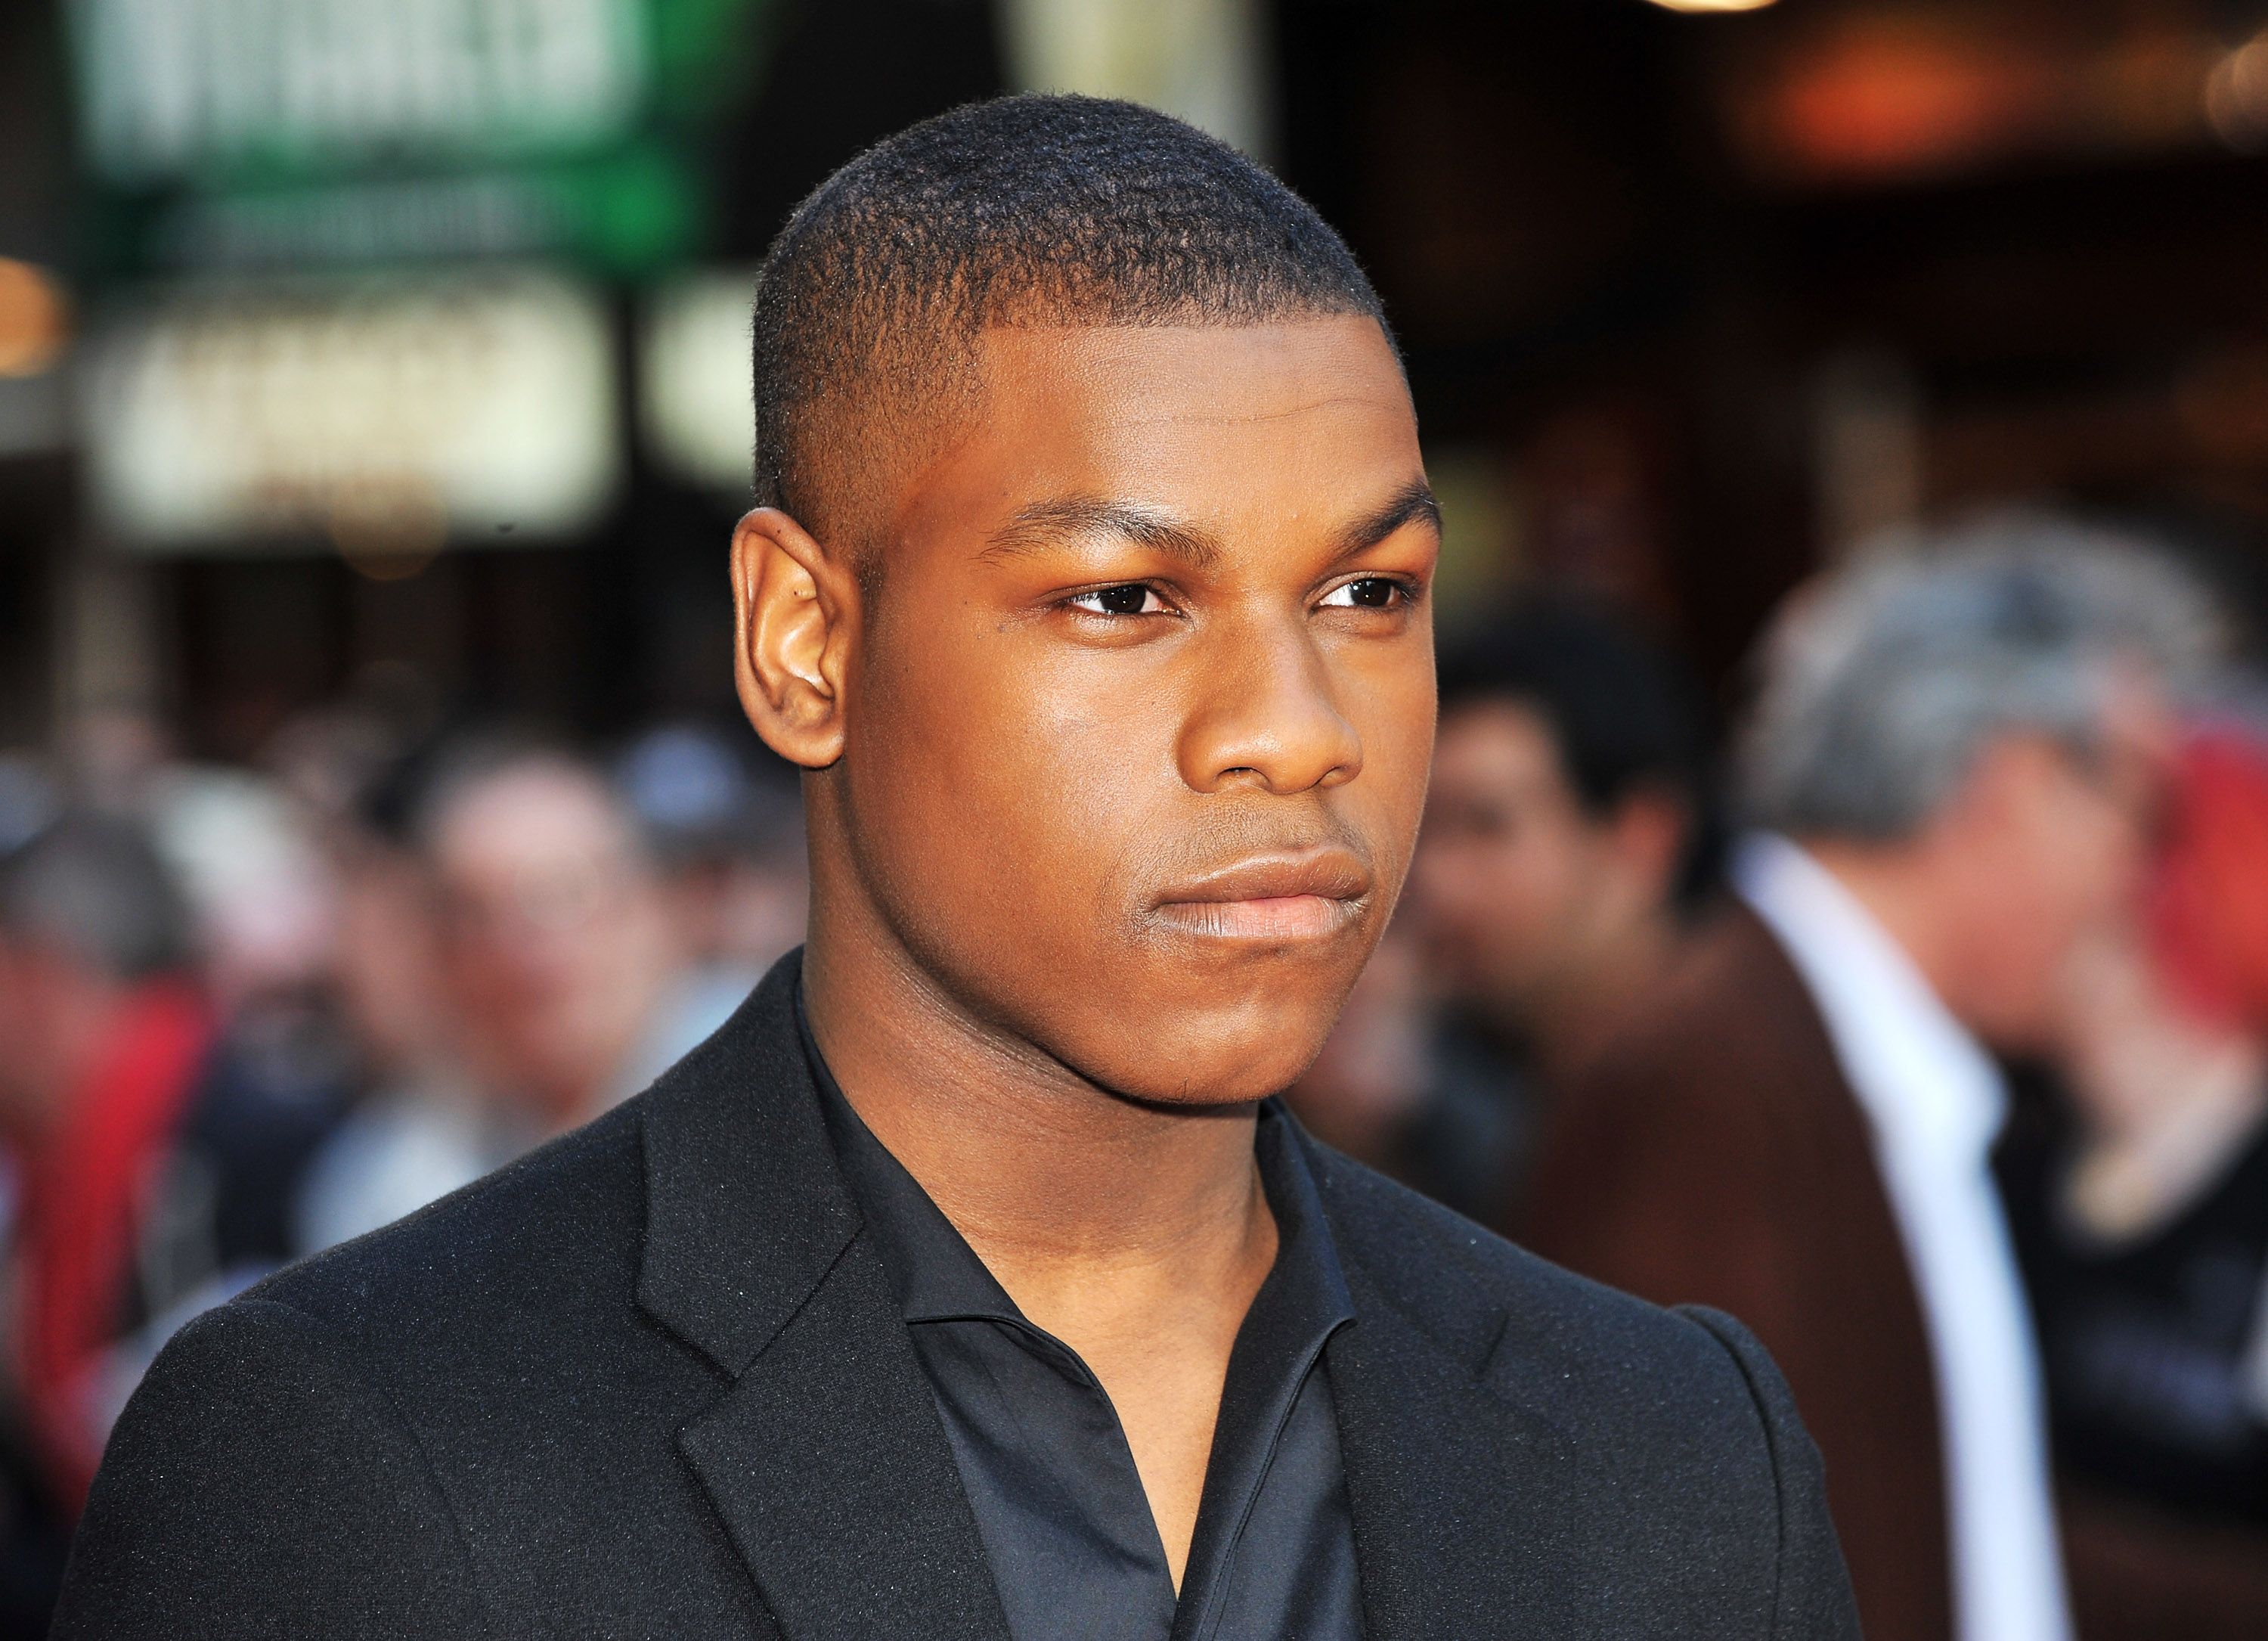 John Boyega at the UK premiere of "Attack the Block" in May 2011. | Photo: Getty Images